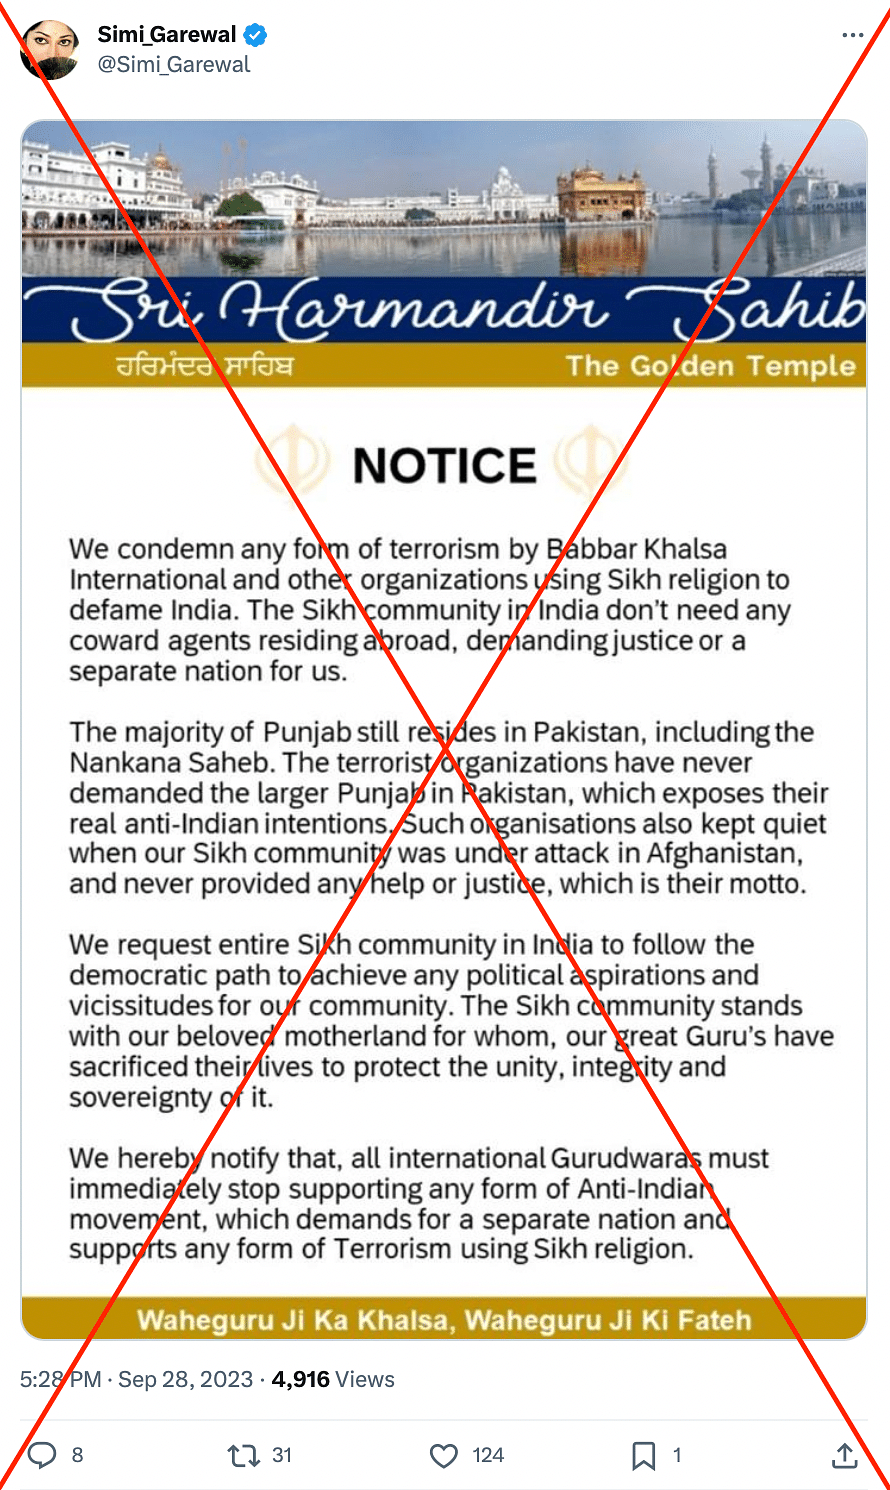 A Shiromani Gurdwara Parbandhak Committee official clarified that the letter was fake and was not issued by SGPC.